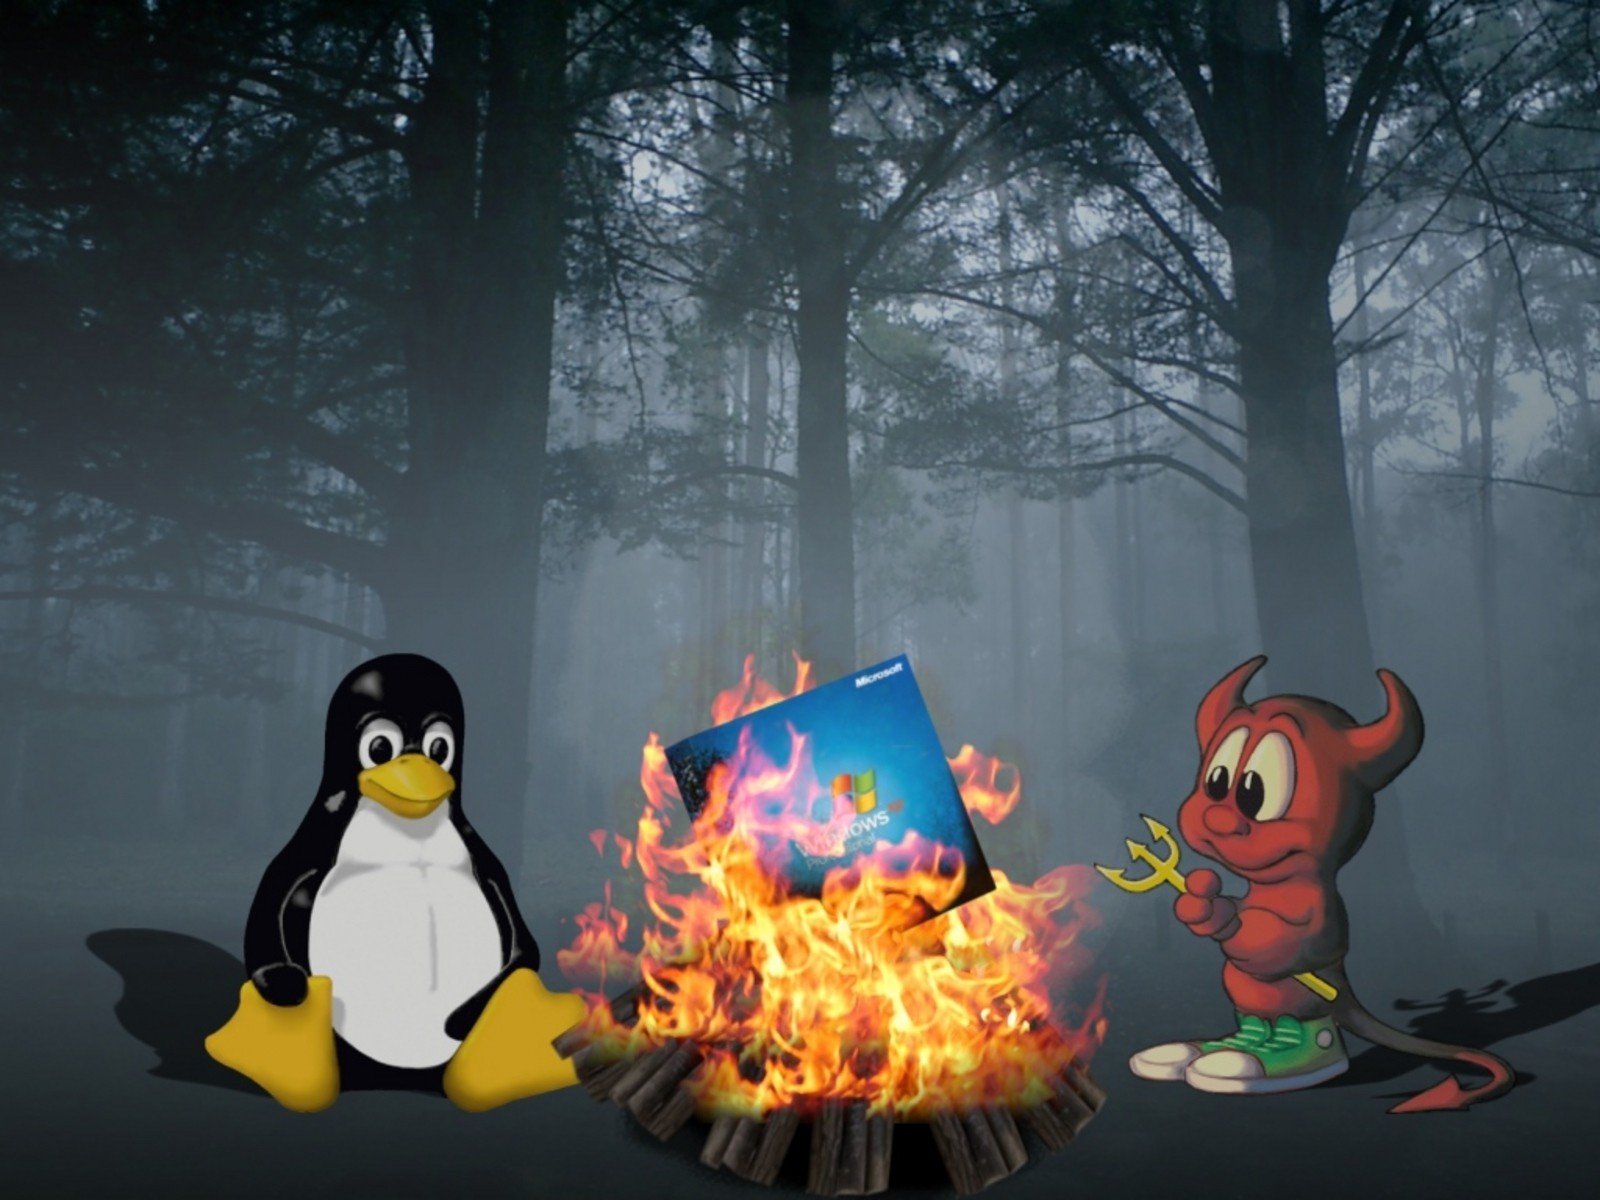 linux, Funny, Windows, Xp, Freebsd, Camp, Fire, Burning Wallpaper